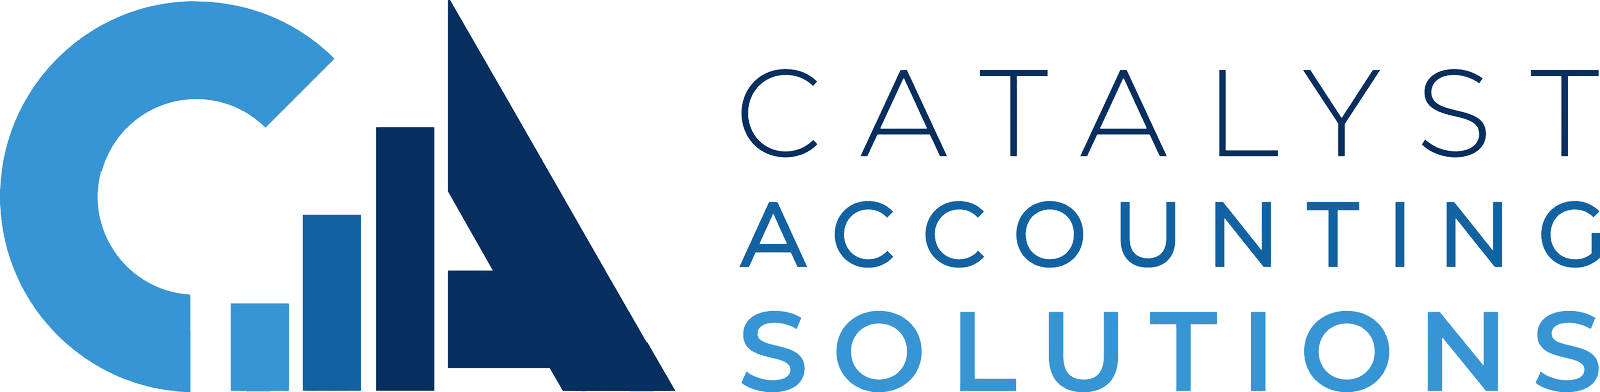 Catalyst Accounting Solutions